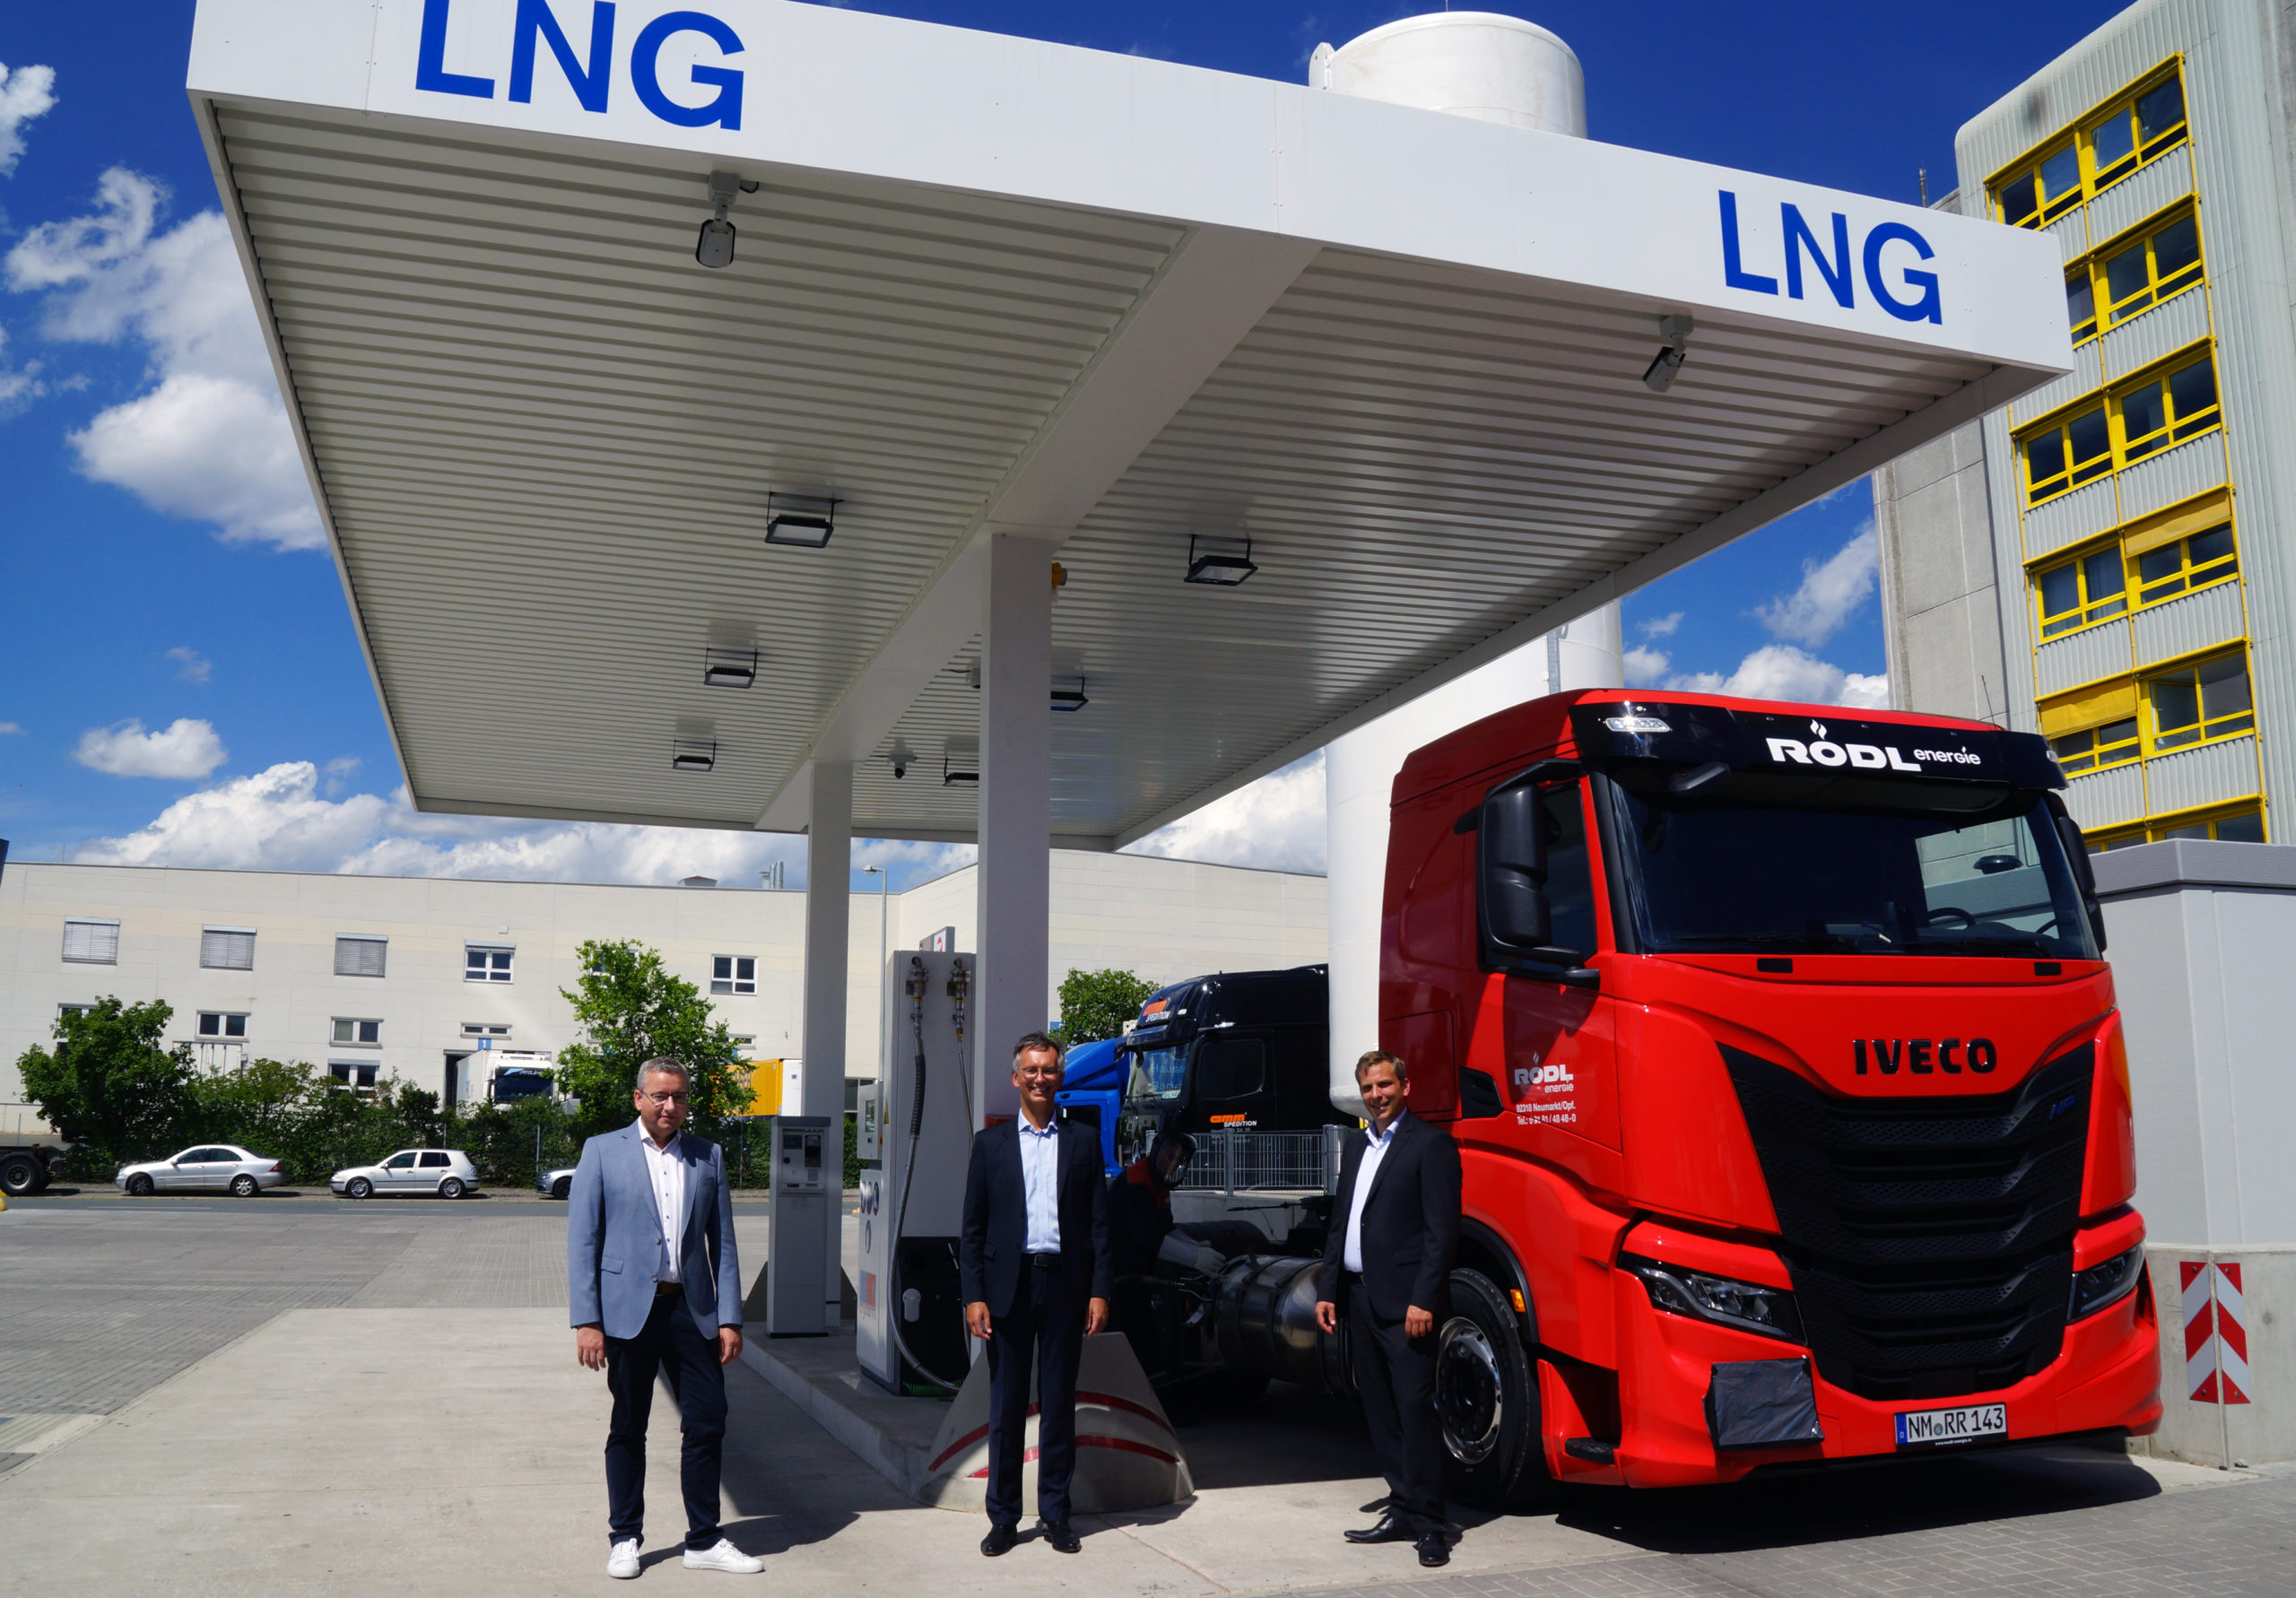 Inauguration of the LNG service station at bayernhafen Nürnberg